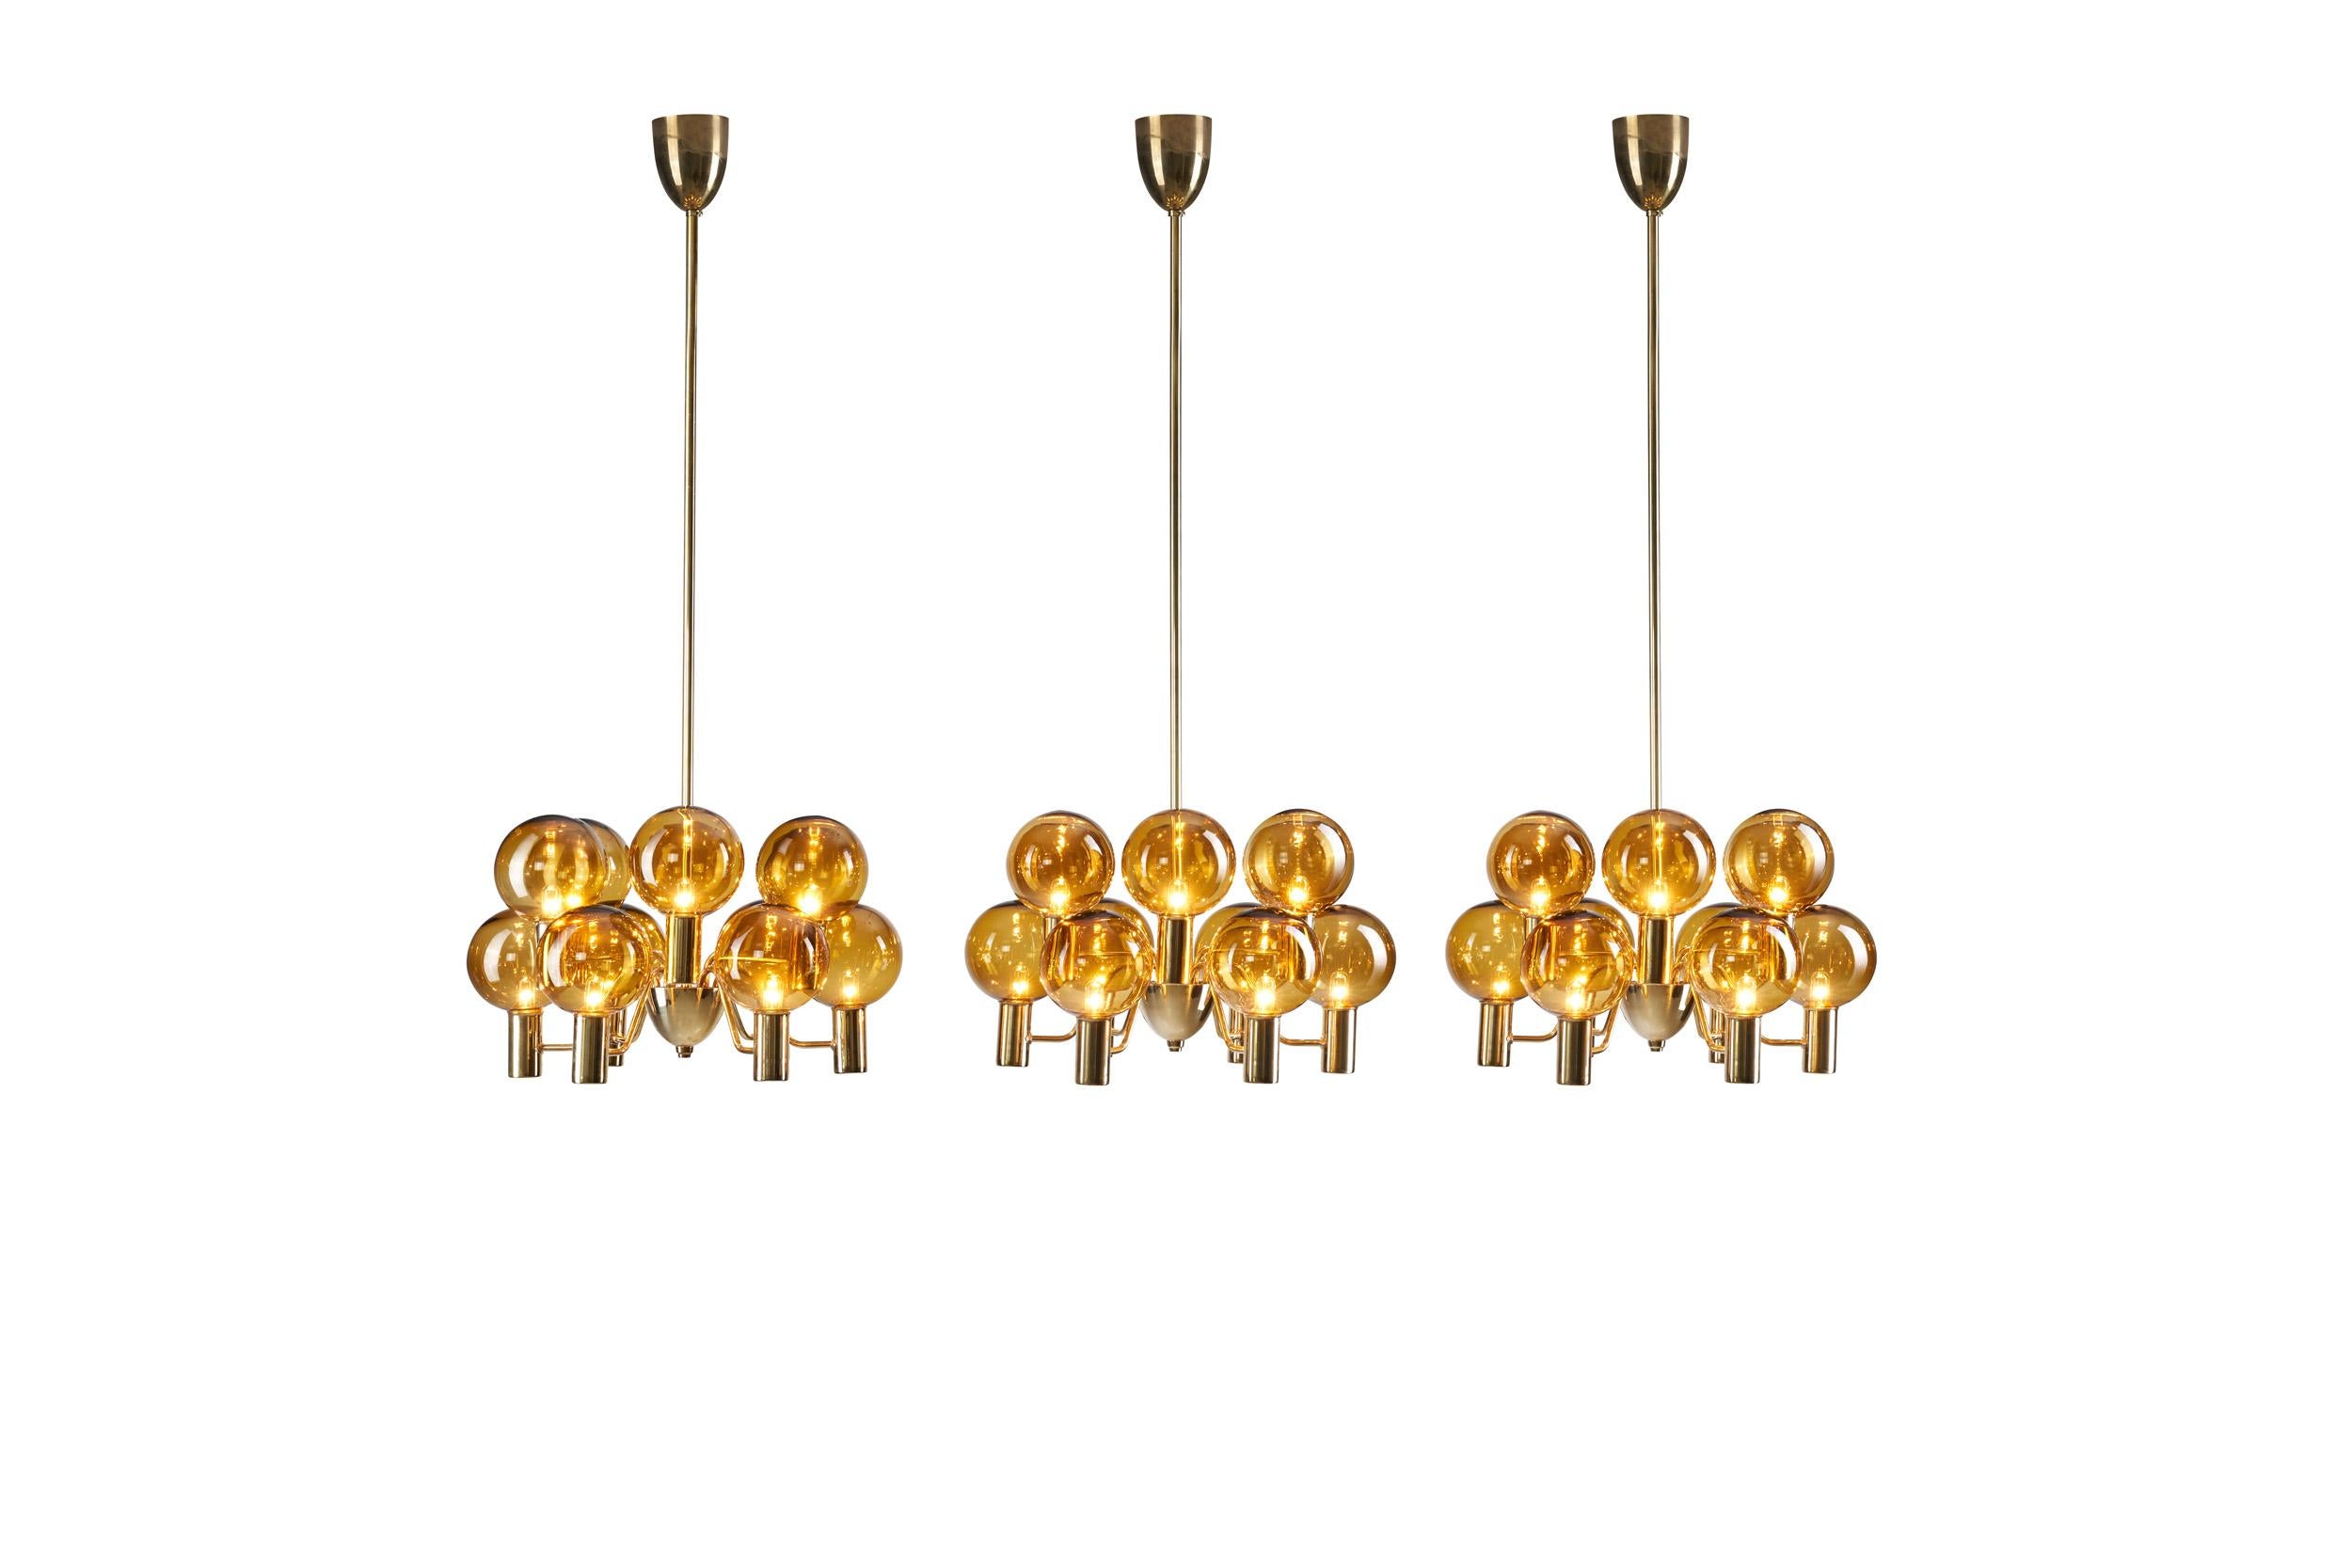 This set of stunning brass and glass “Patricia” chandeliers was created in what we now call “the golden age of Scandinavian design”. Hans-Agne Jakobsson created Swedish lighting models that still define the era, and this model is no